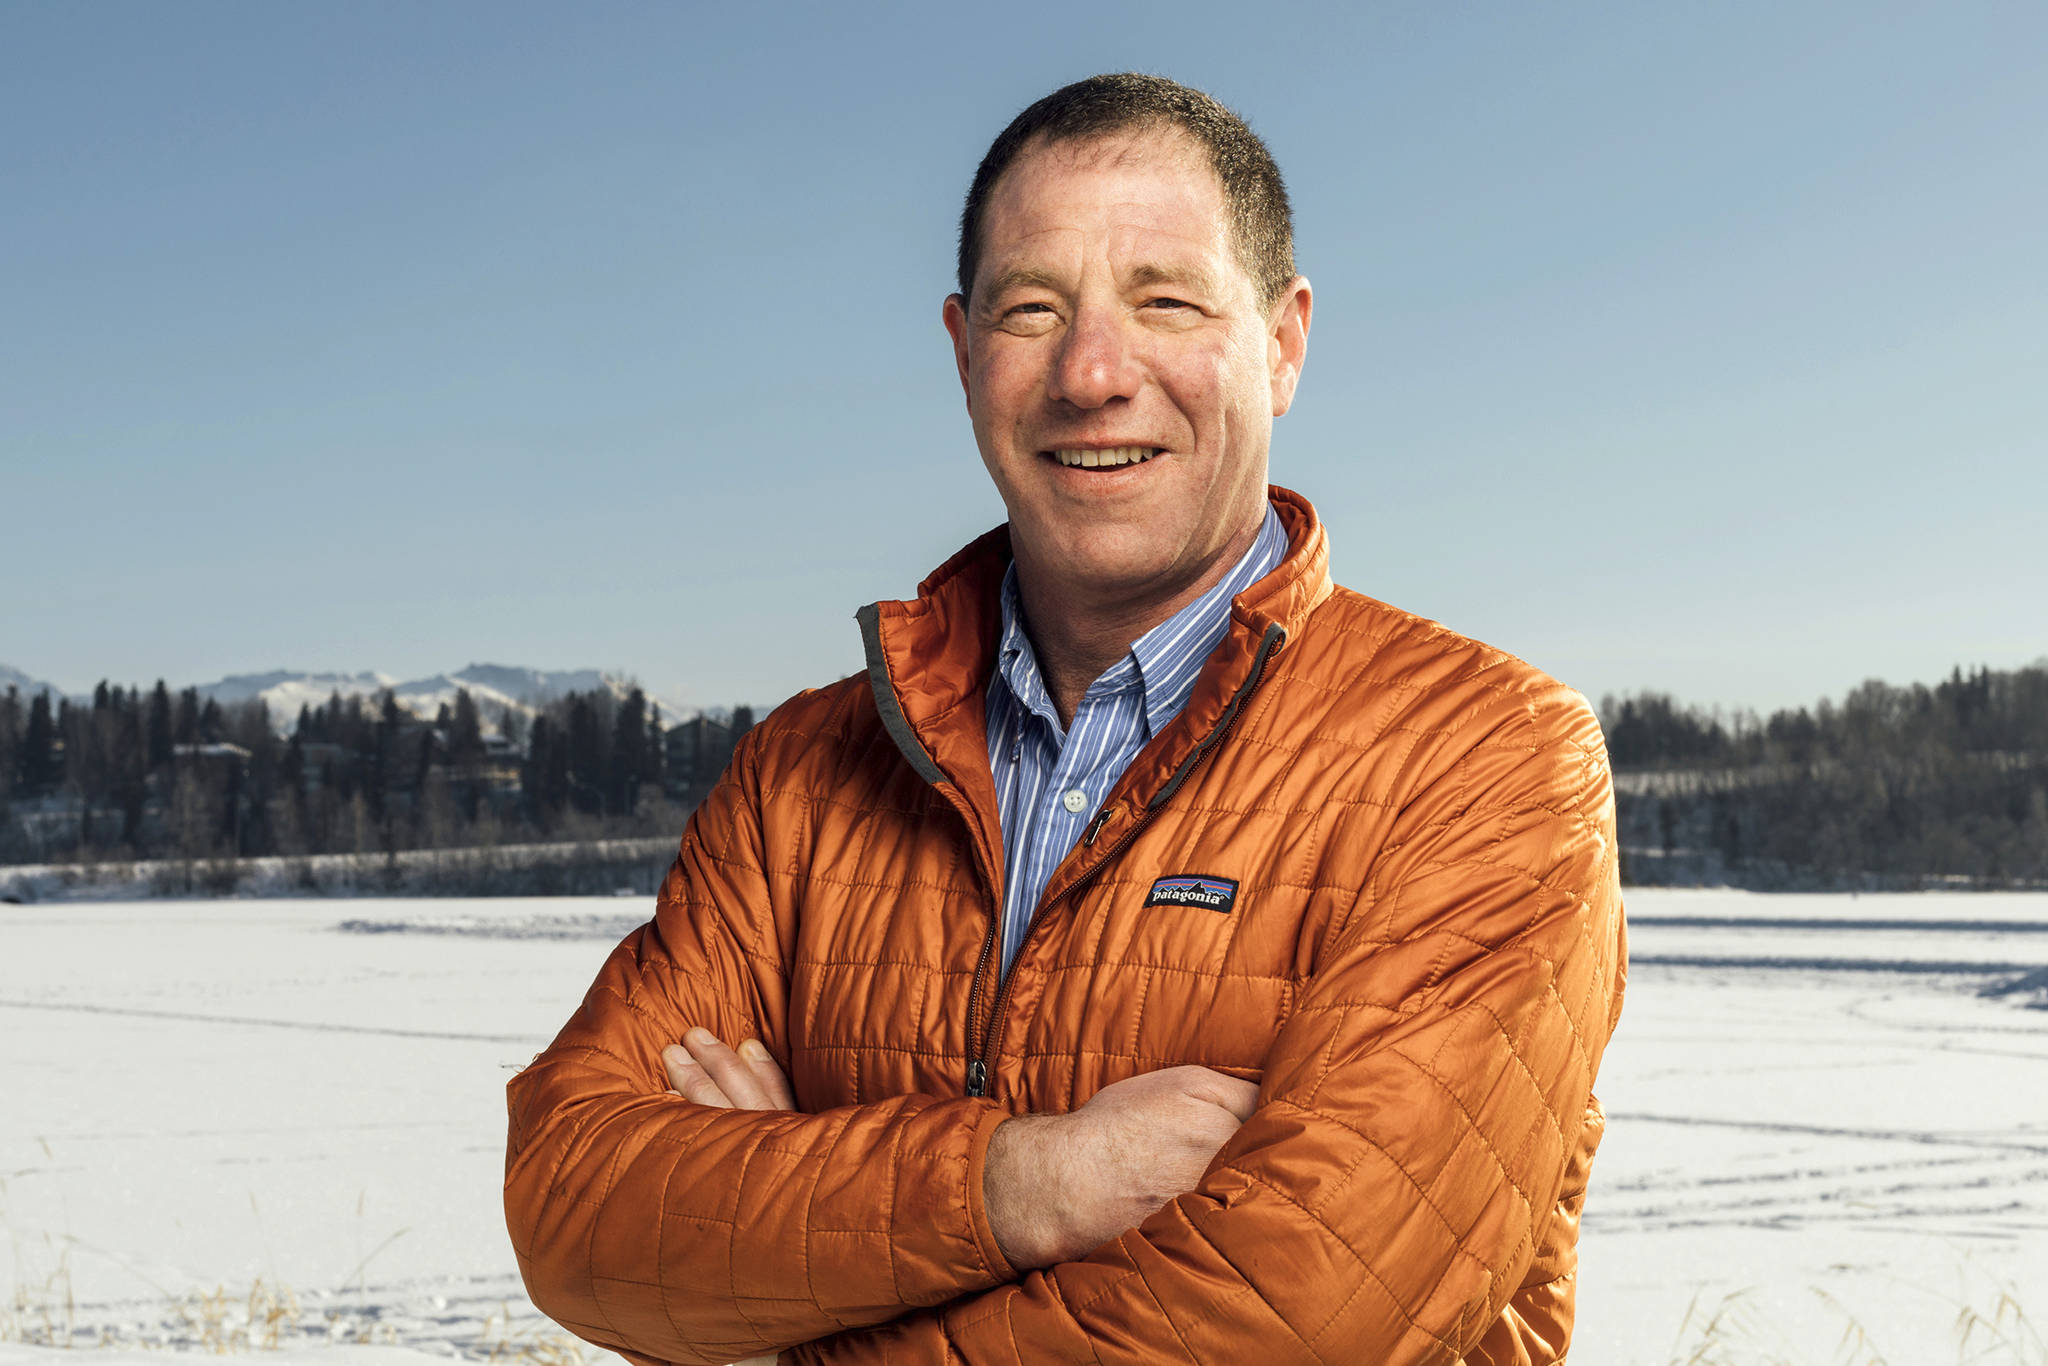 This undated photo shows Independent candidate Al Gross. Gross, an independent running with Democratic support, is challenging Republican U.S. Sen. Dan Sullivan in Alaska, a state that has long been a GOP stronghold. Across the country, Republicans are nervous about Senate seats like Sullivan's they once thought safe as Democrats hope to capitalize on President Donald Trump's unpopularity to retake the chamber. (Gross for Senate Campaign)